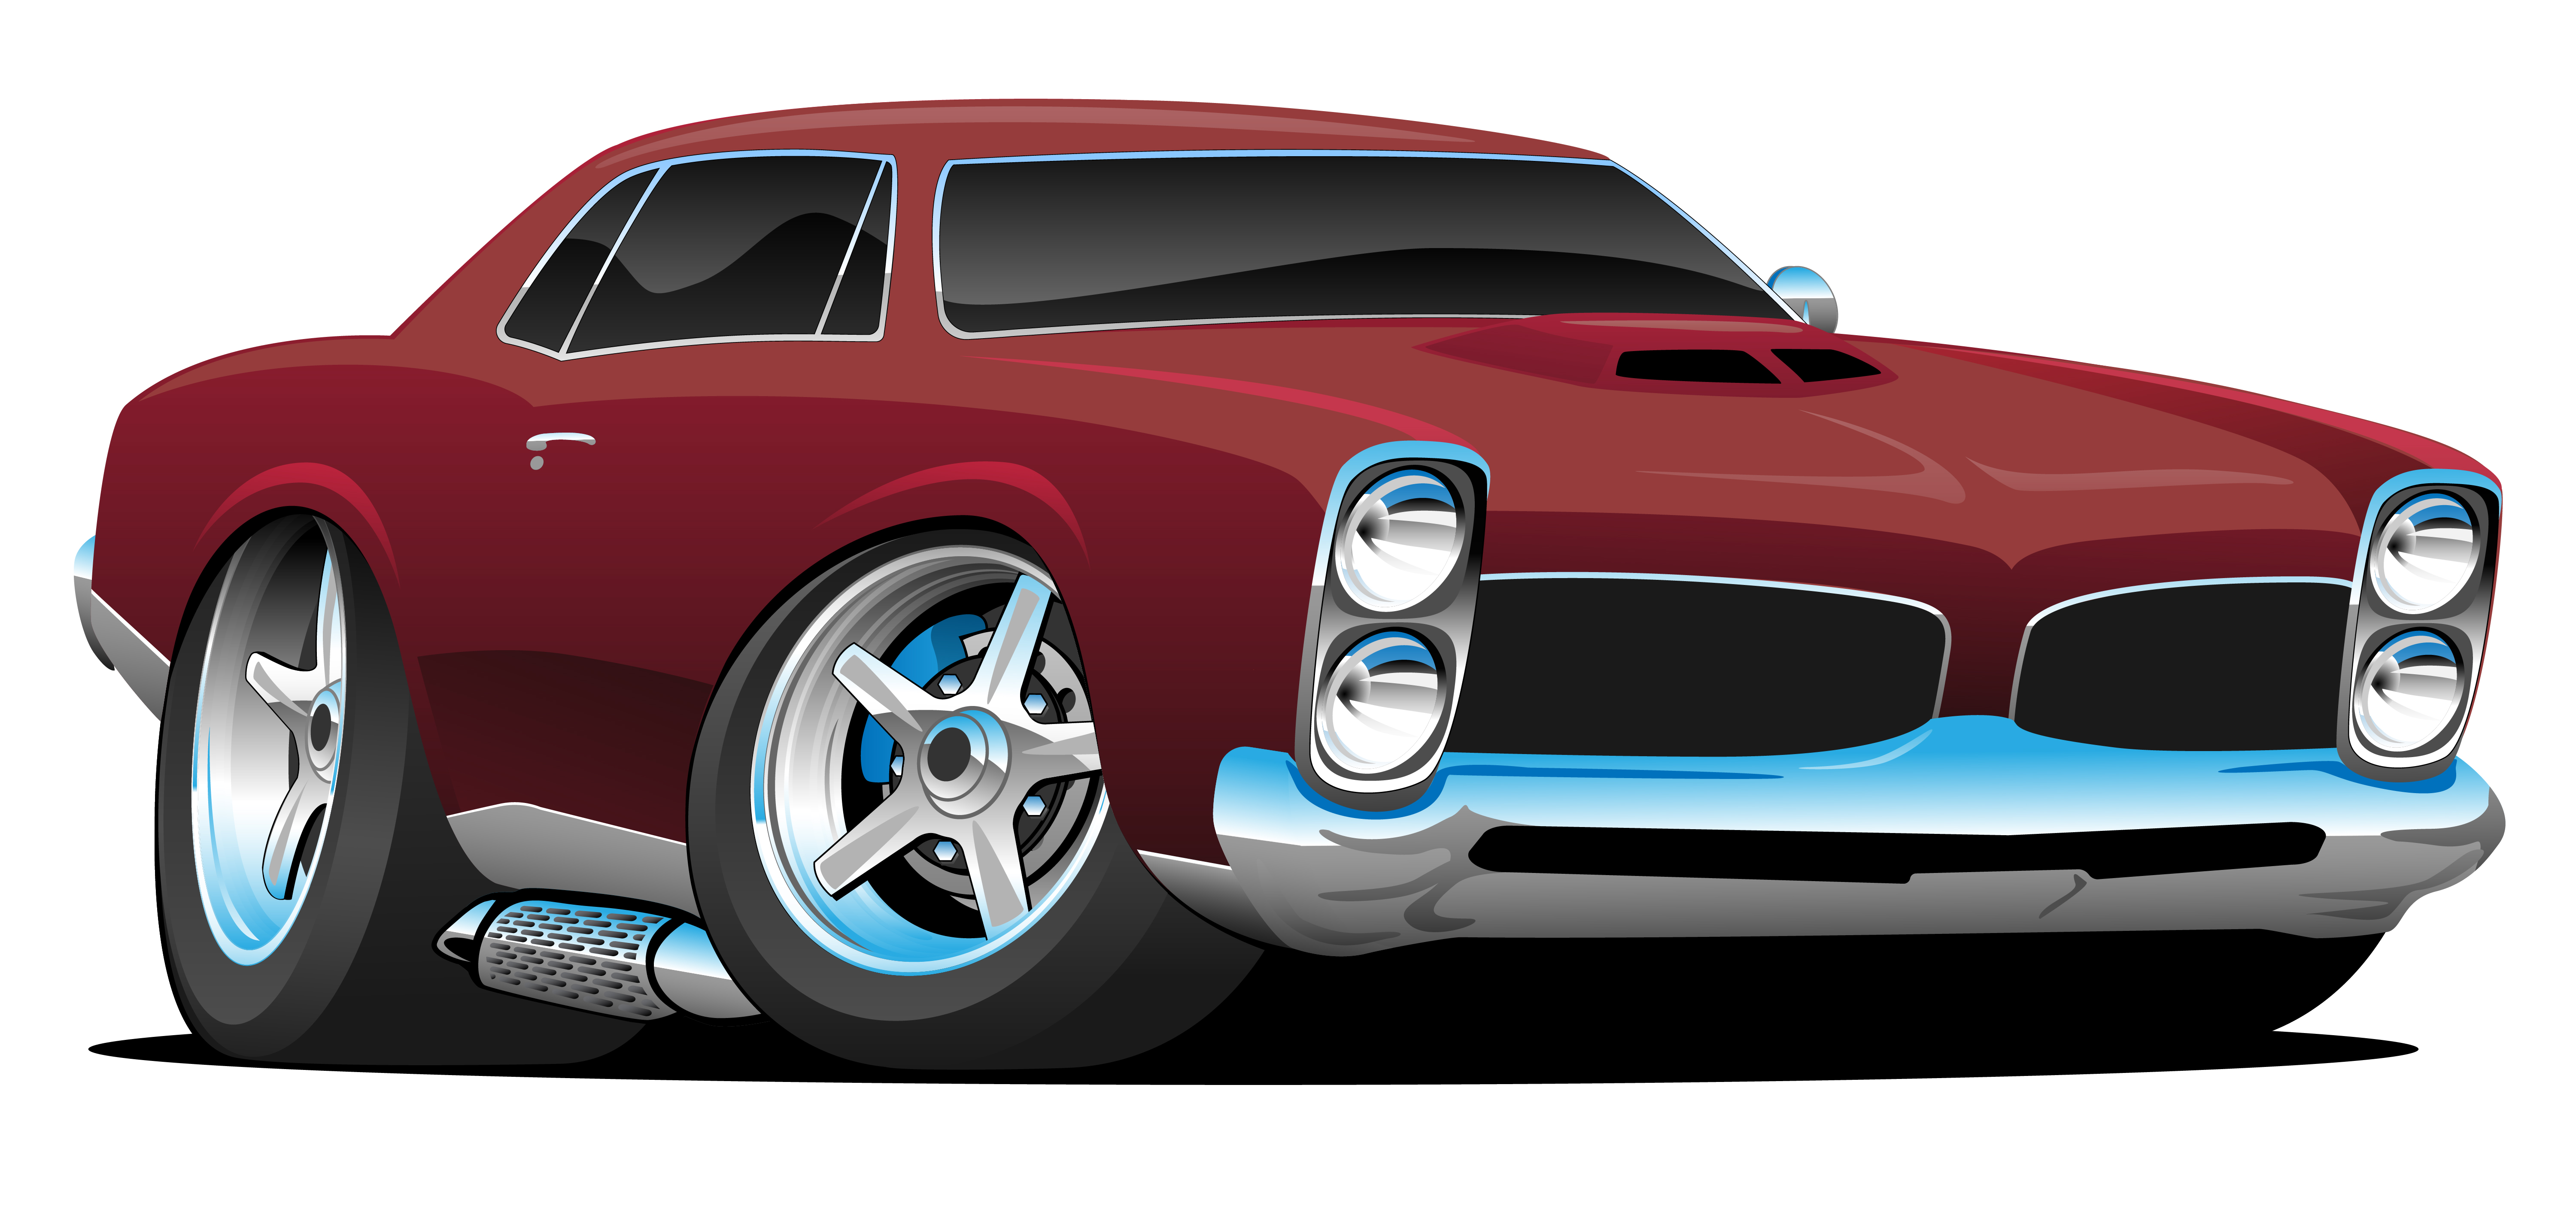 Download Classic American Muscle Car Cartoon Vector Illustration ...